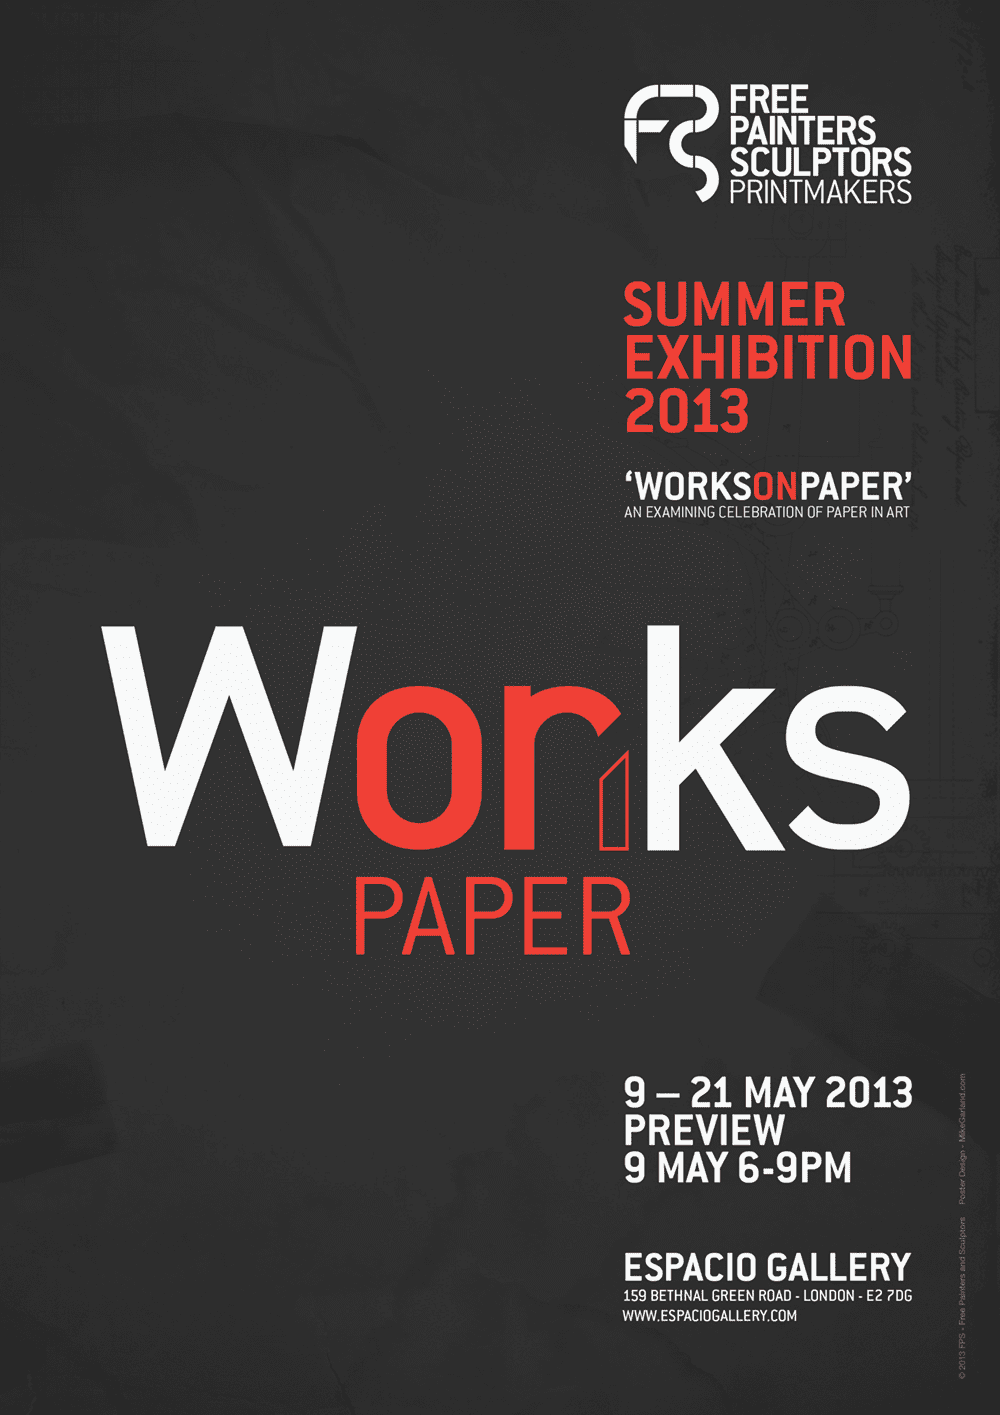 Mike-Garland-Free-Painters-and-Sculptors-Summer-Exhibition-Poster-Design-2013